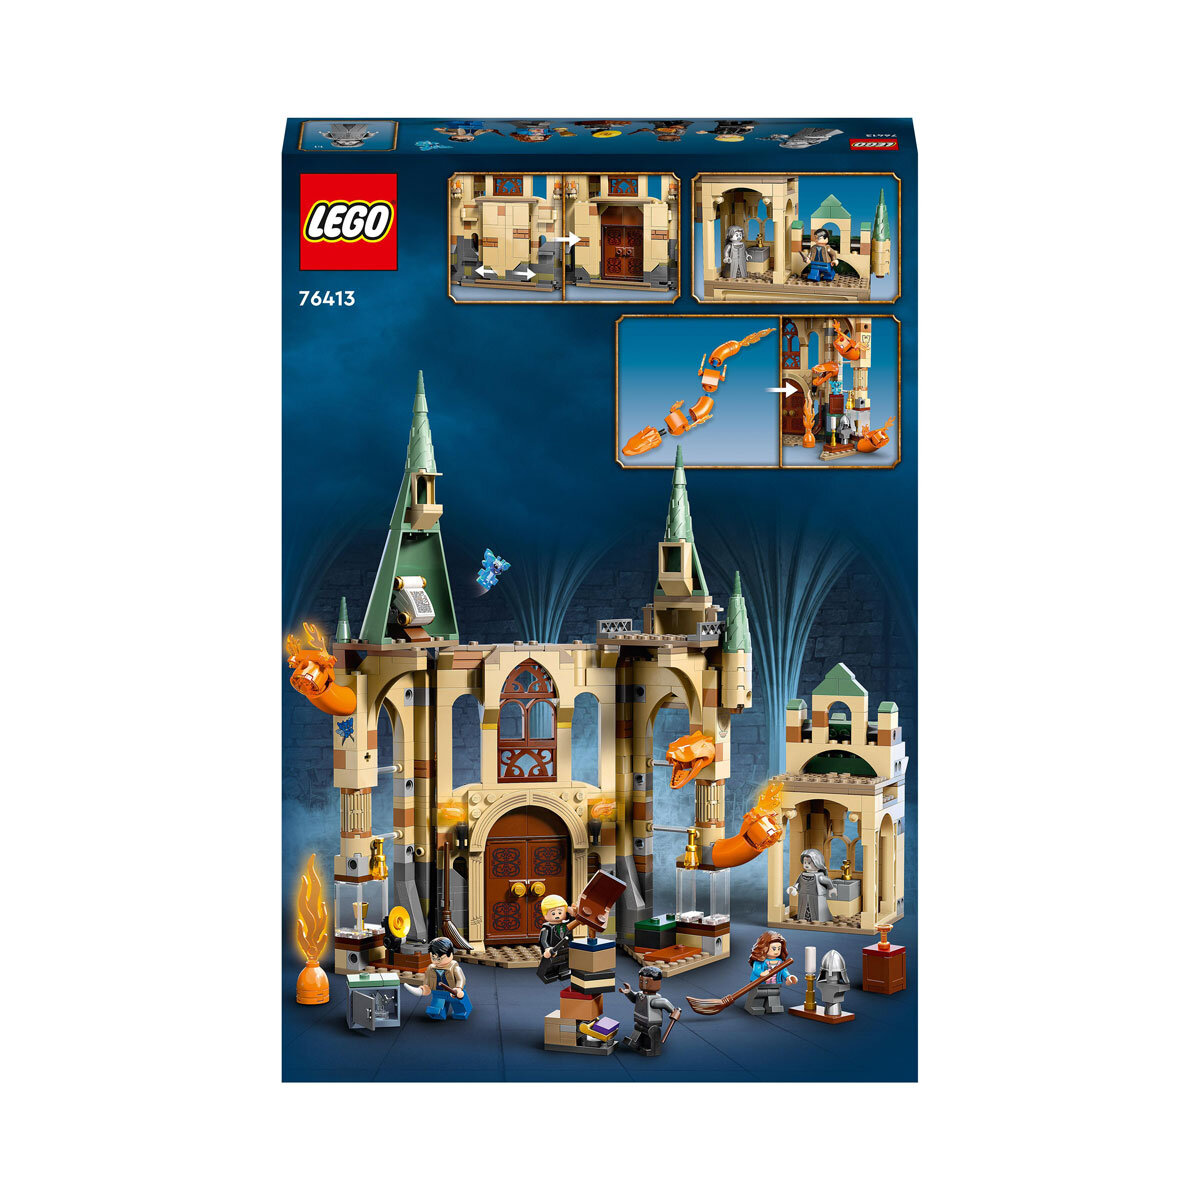 Lego 76413 Harry Potter Hogwarts: Room of Requirement